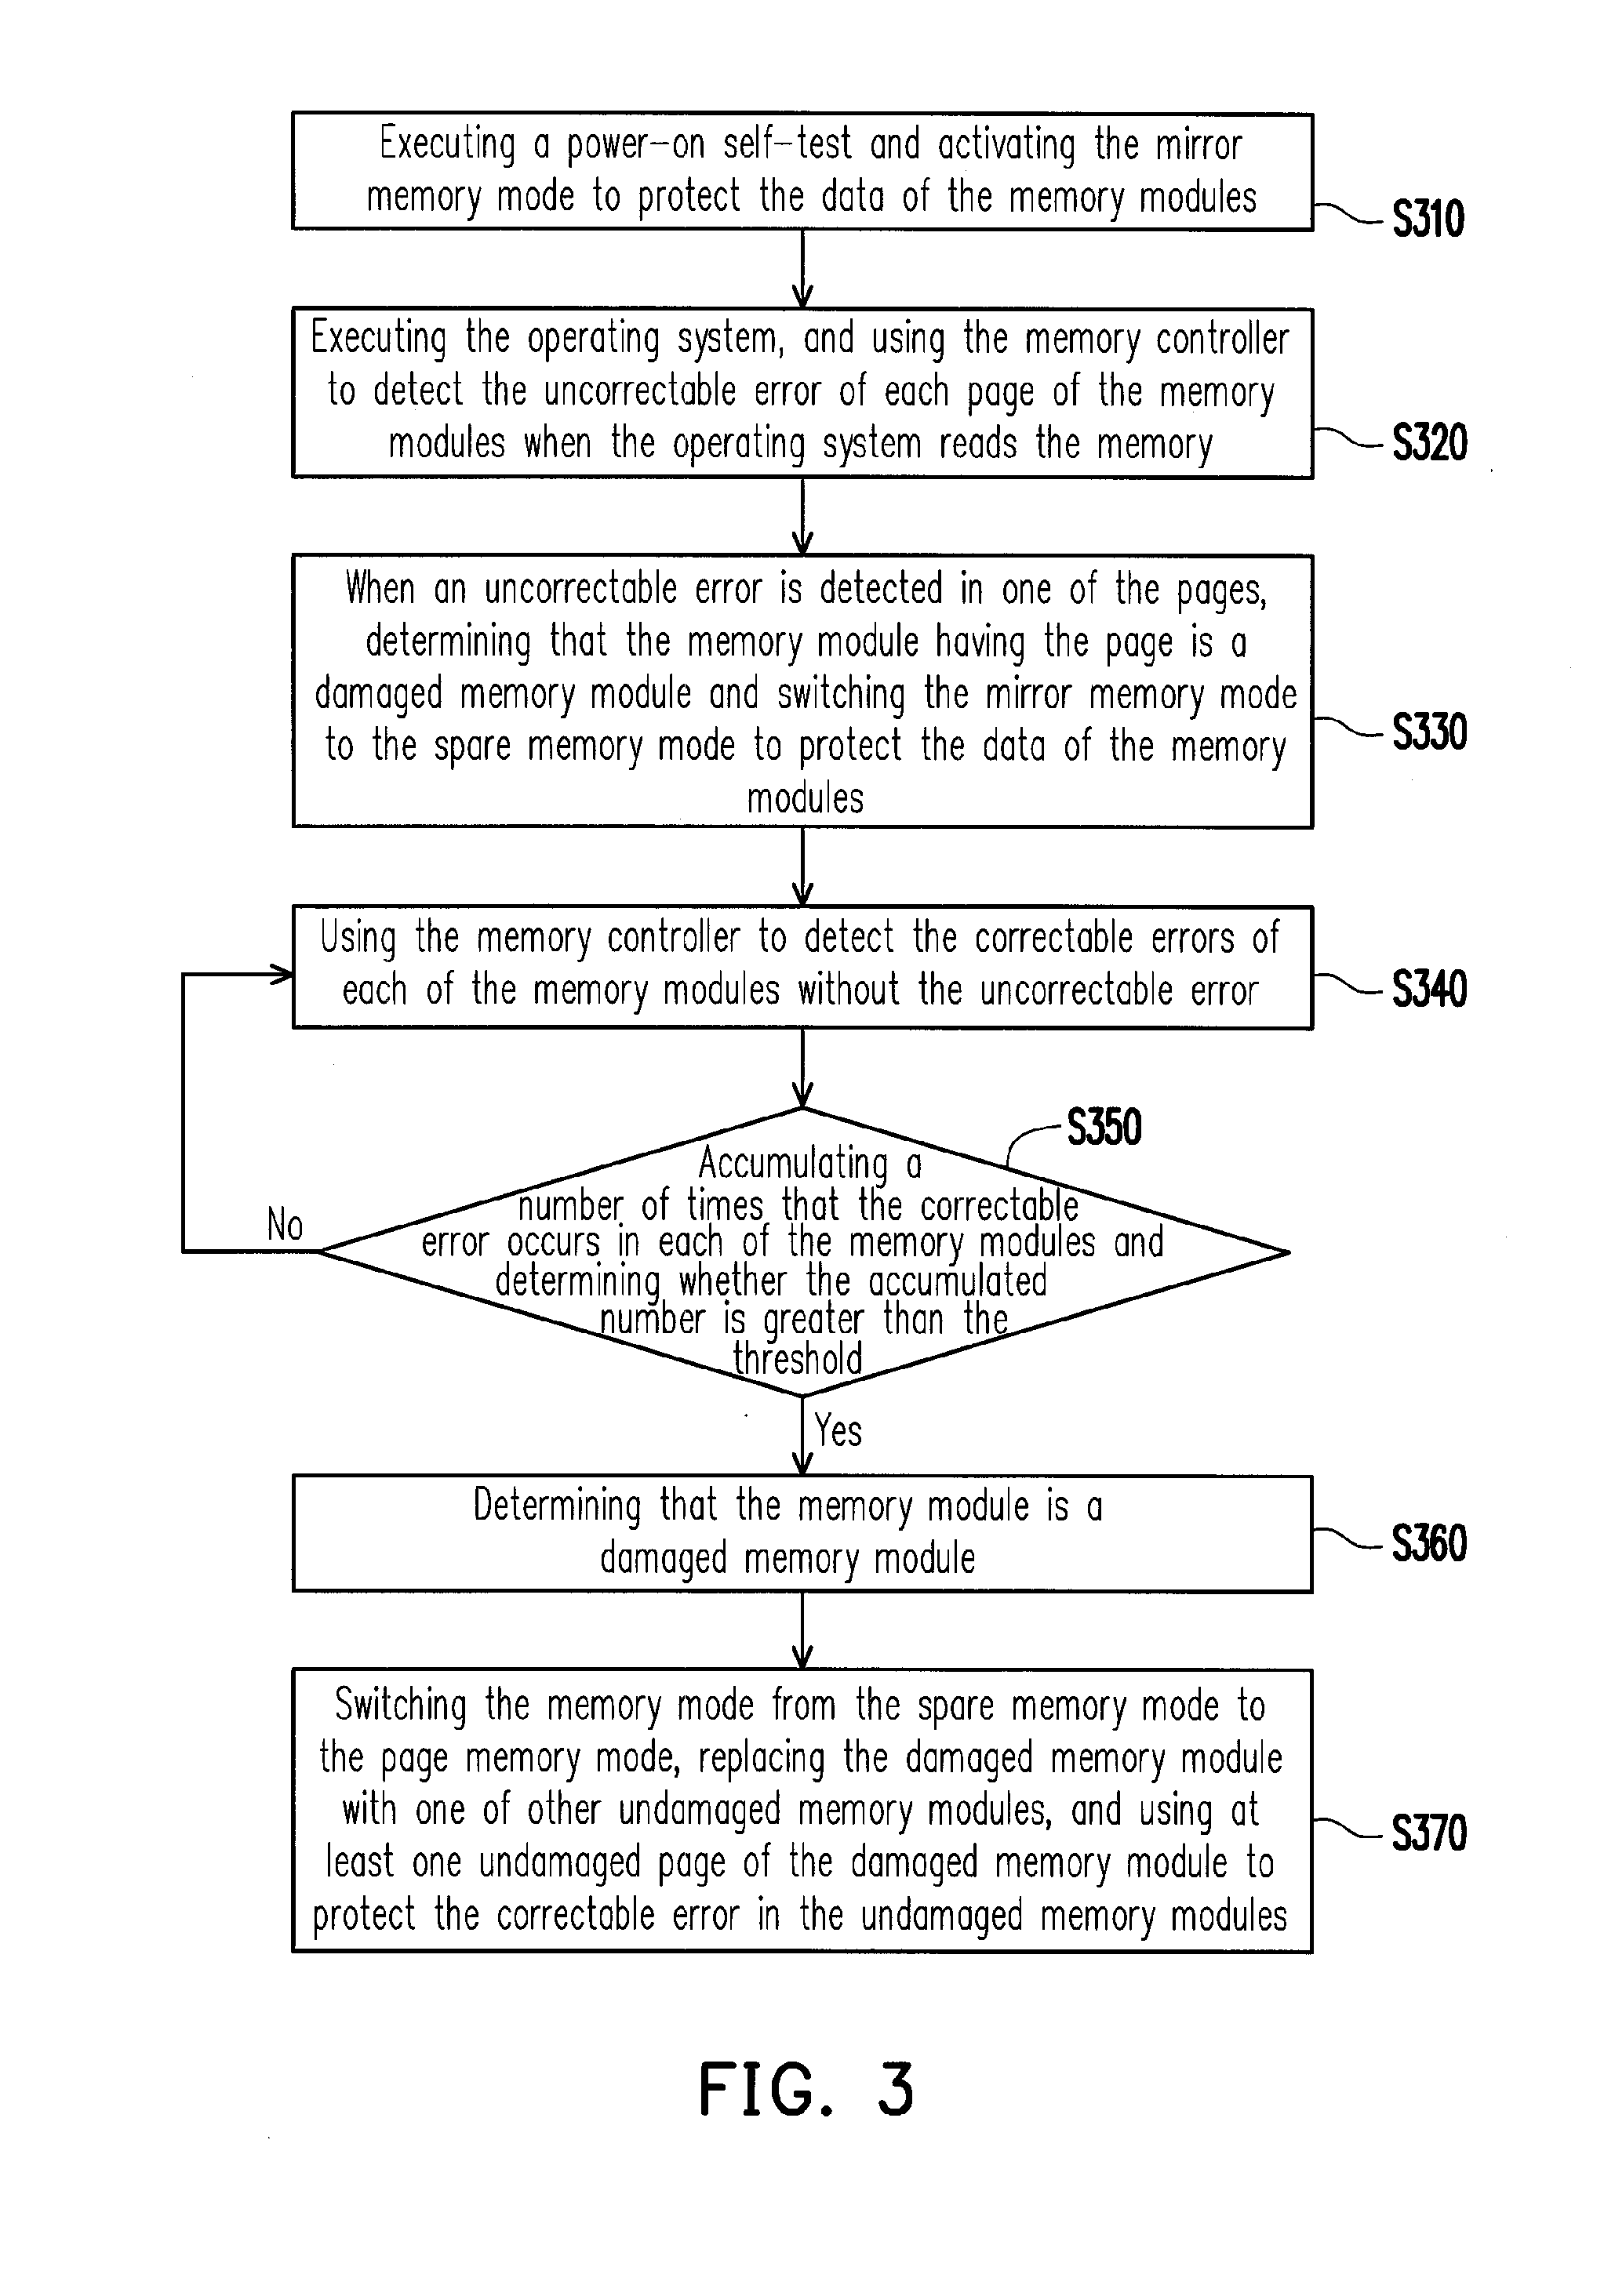 Method for protecting data in damaged memory cells by dynamically switching memory mode